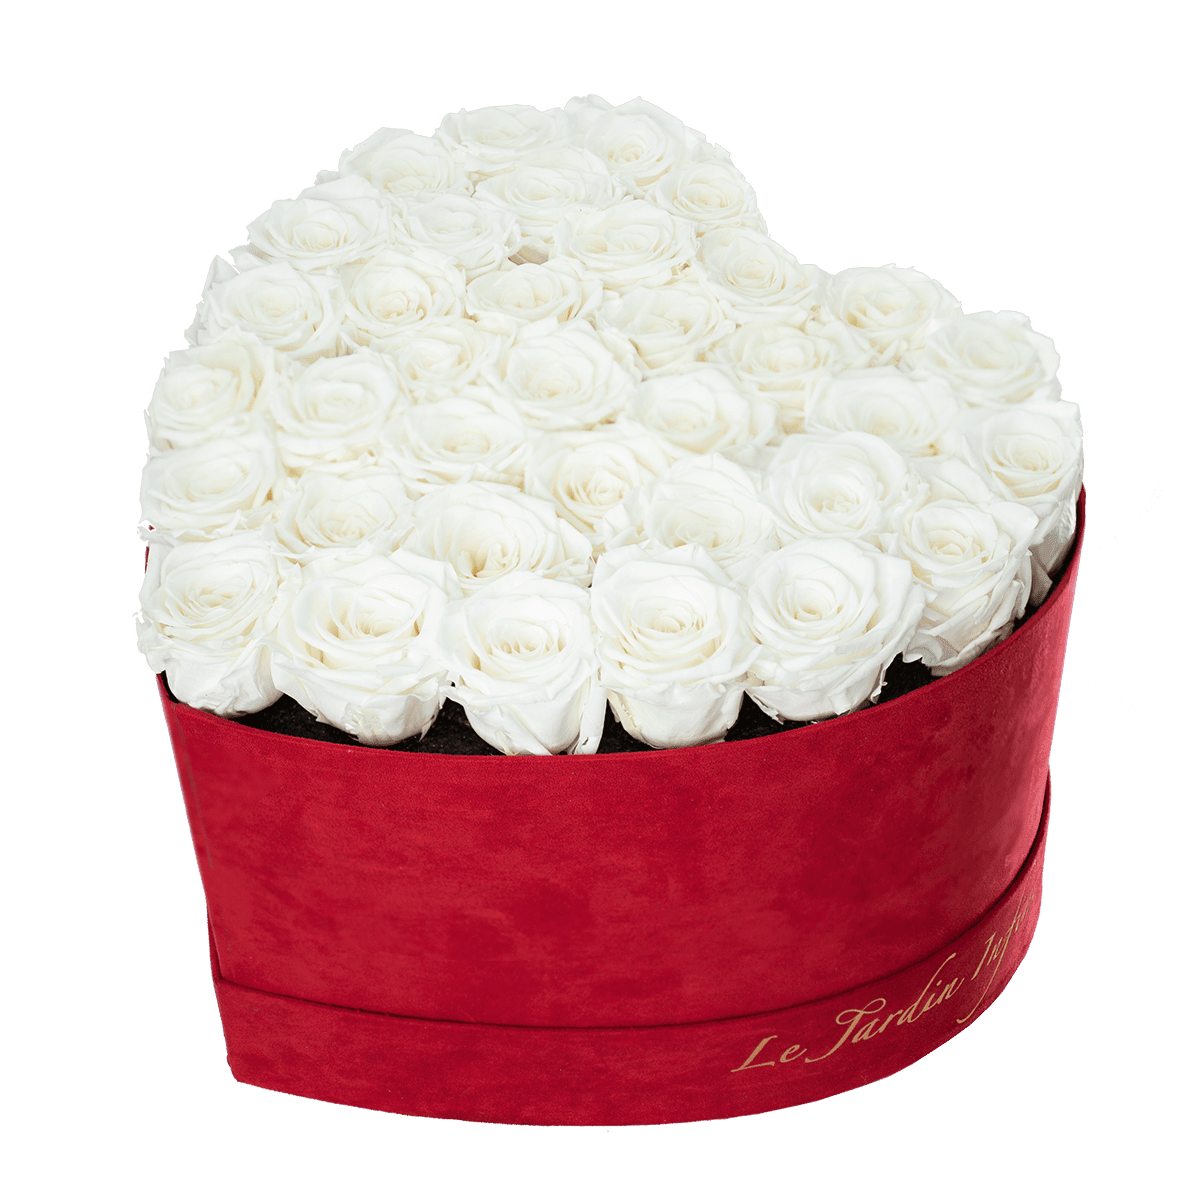 36 White Preserved Roses in A Heart Shaped Box - Small Heart Luxury Red Suede Box